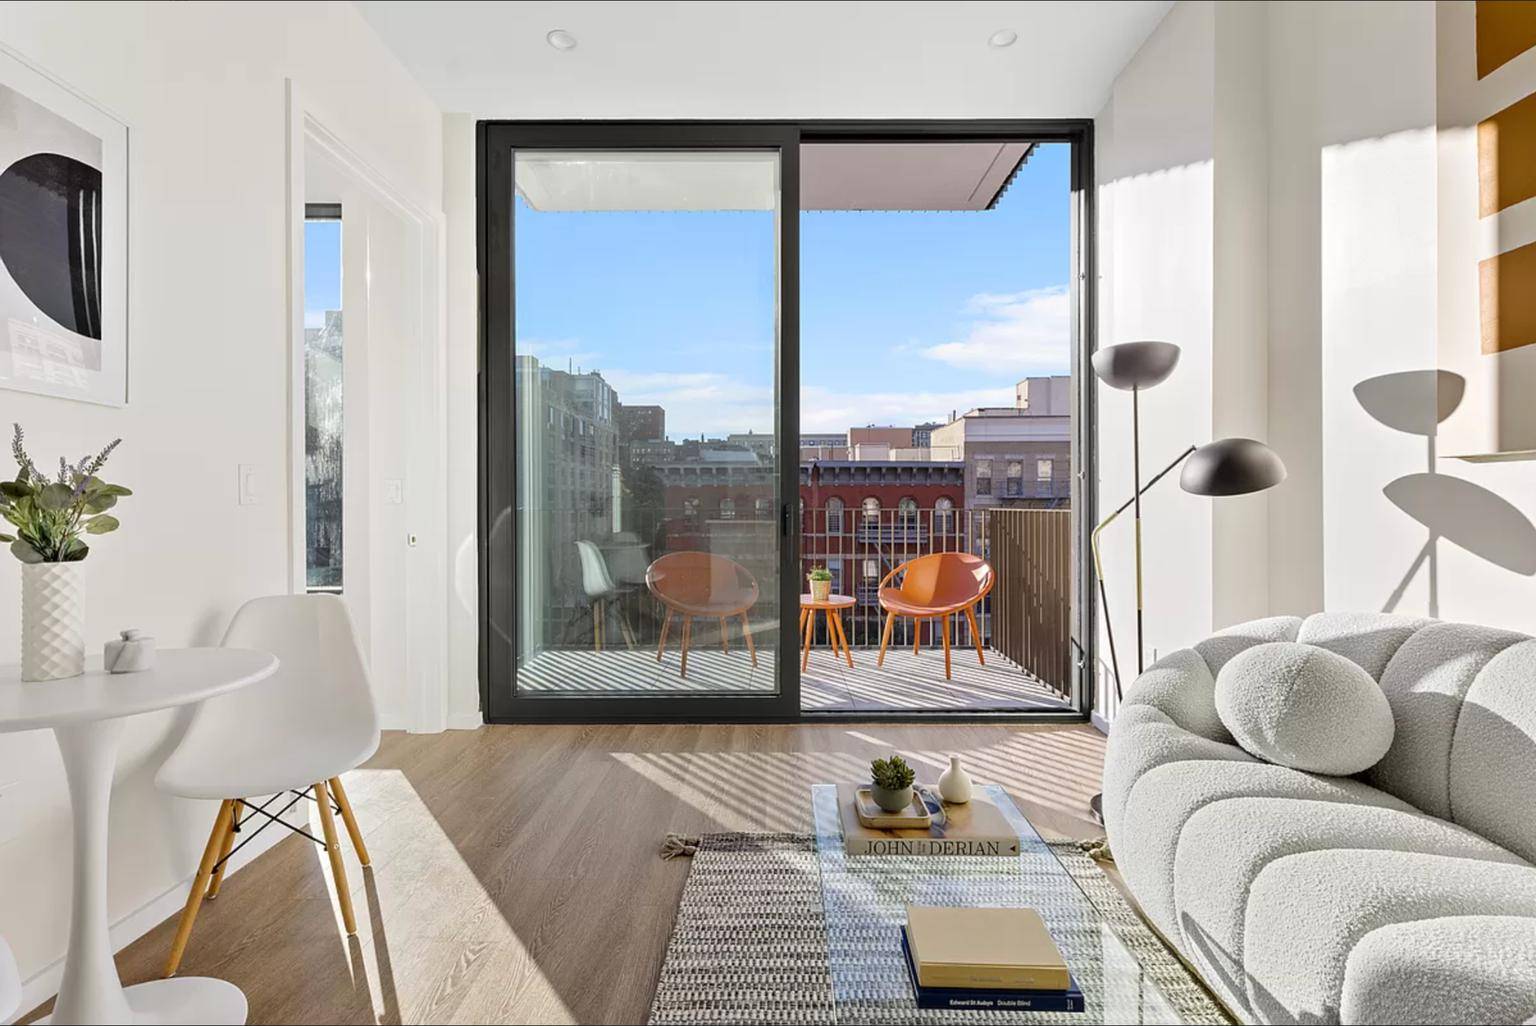 Park Row Brand New Luxury Rental 2 Bed 1 Bath ResidenceEach unit offers immense natural light through oversized 8ft windows amp ; soaring 11ft ceilings !